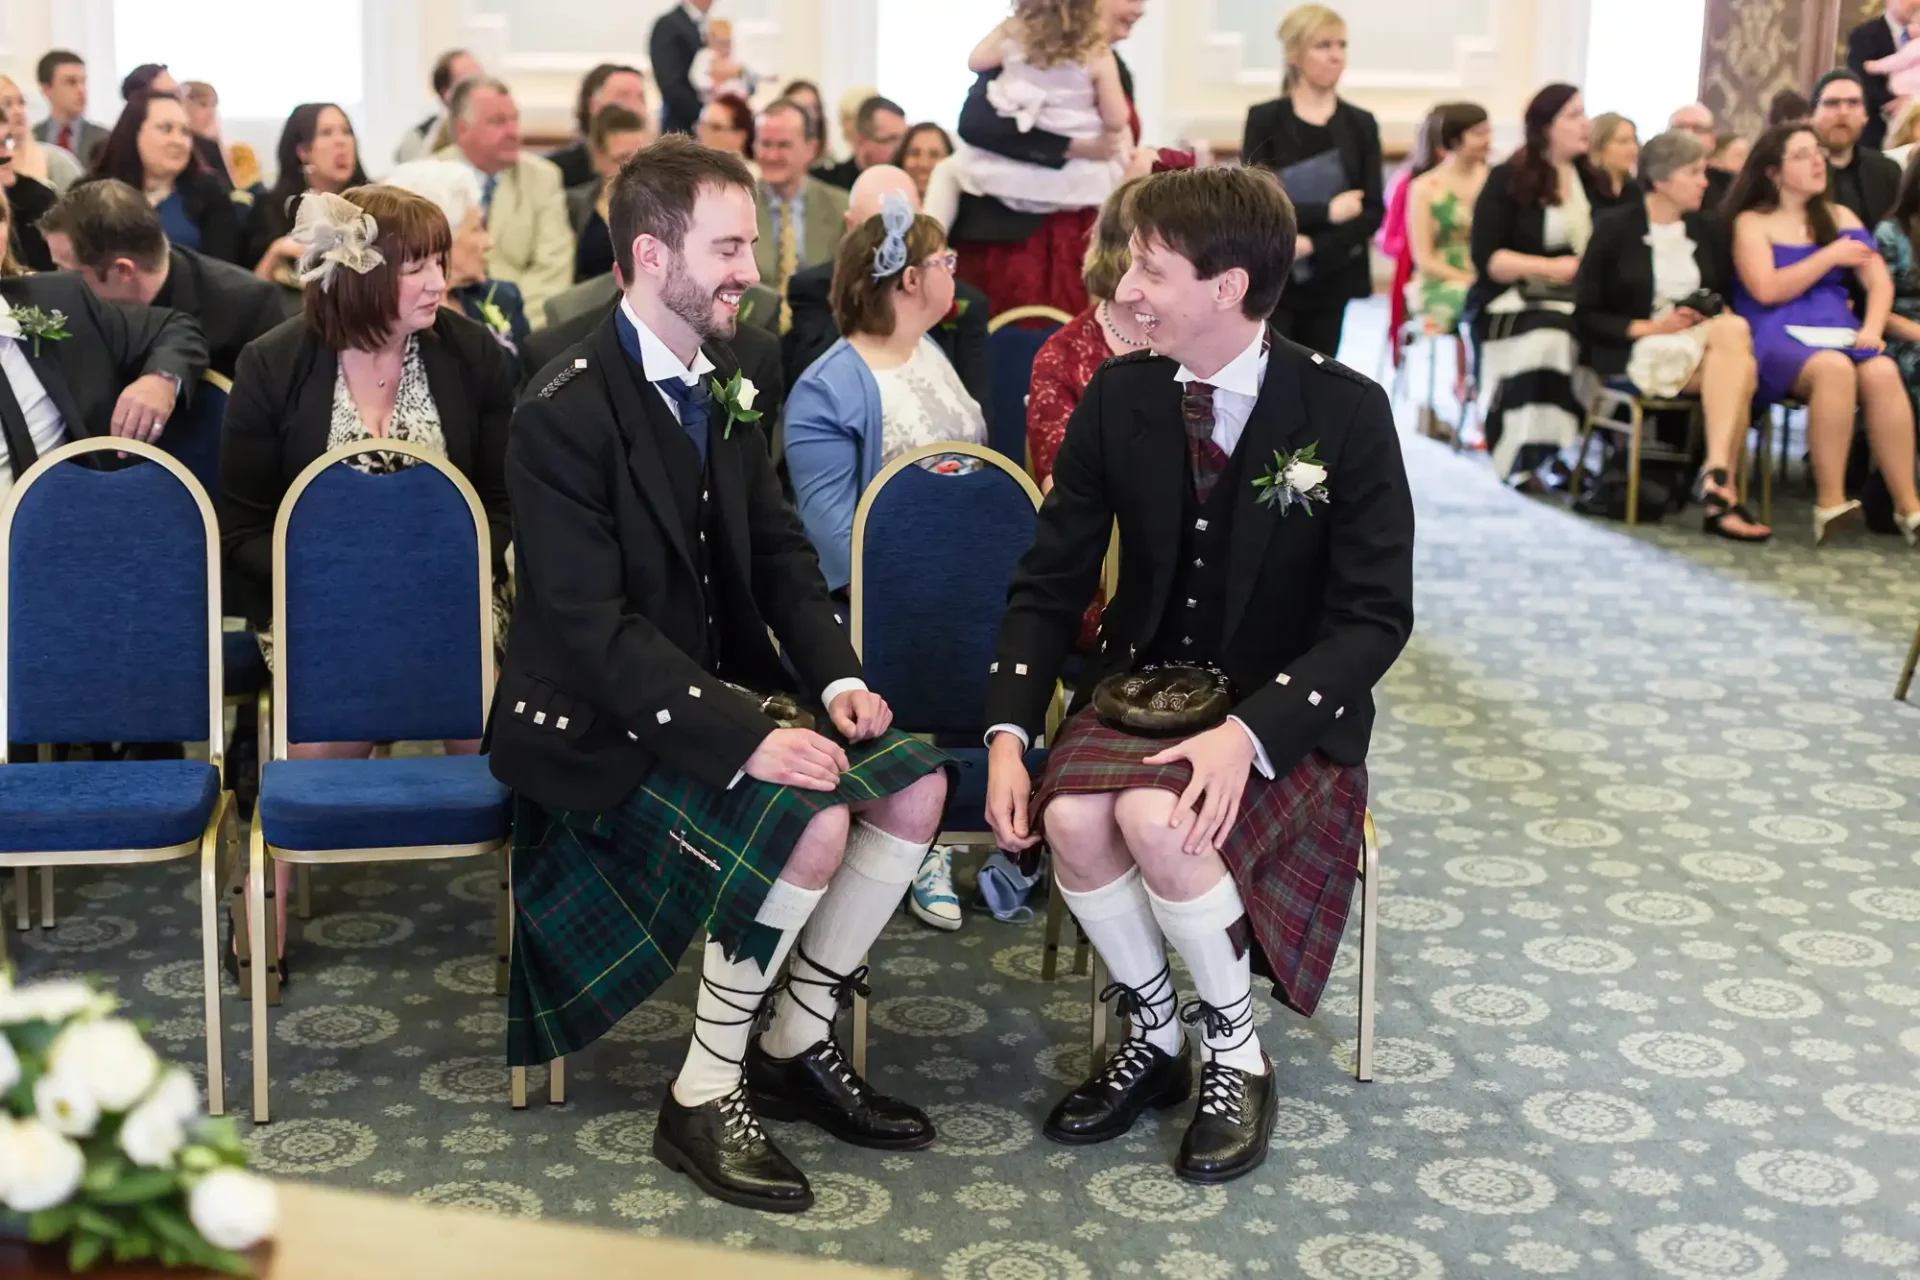 Two men in traditional scottish kilts and attire sitting and laughing together at a wedding ceremony, with guests seated around them.